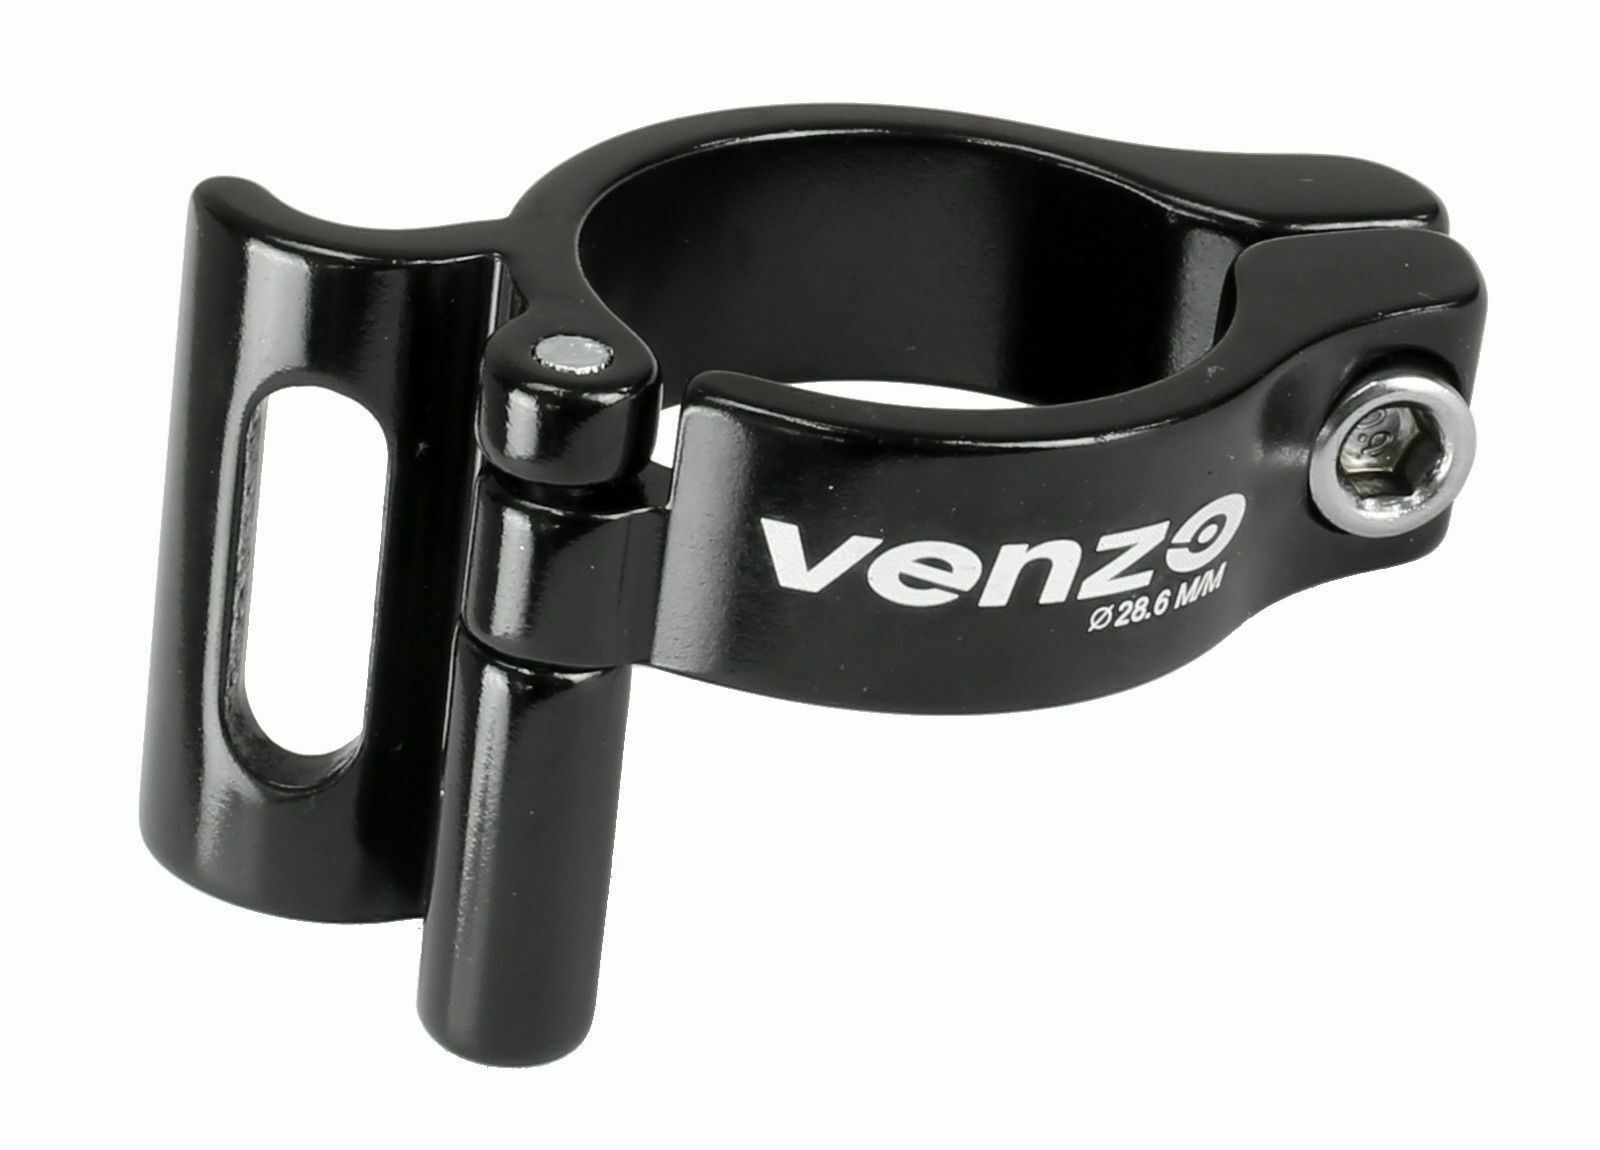 Venzo Adjustable Braze On Front Derailleur Adapter Clamp 28.6mm